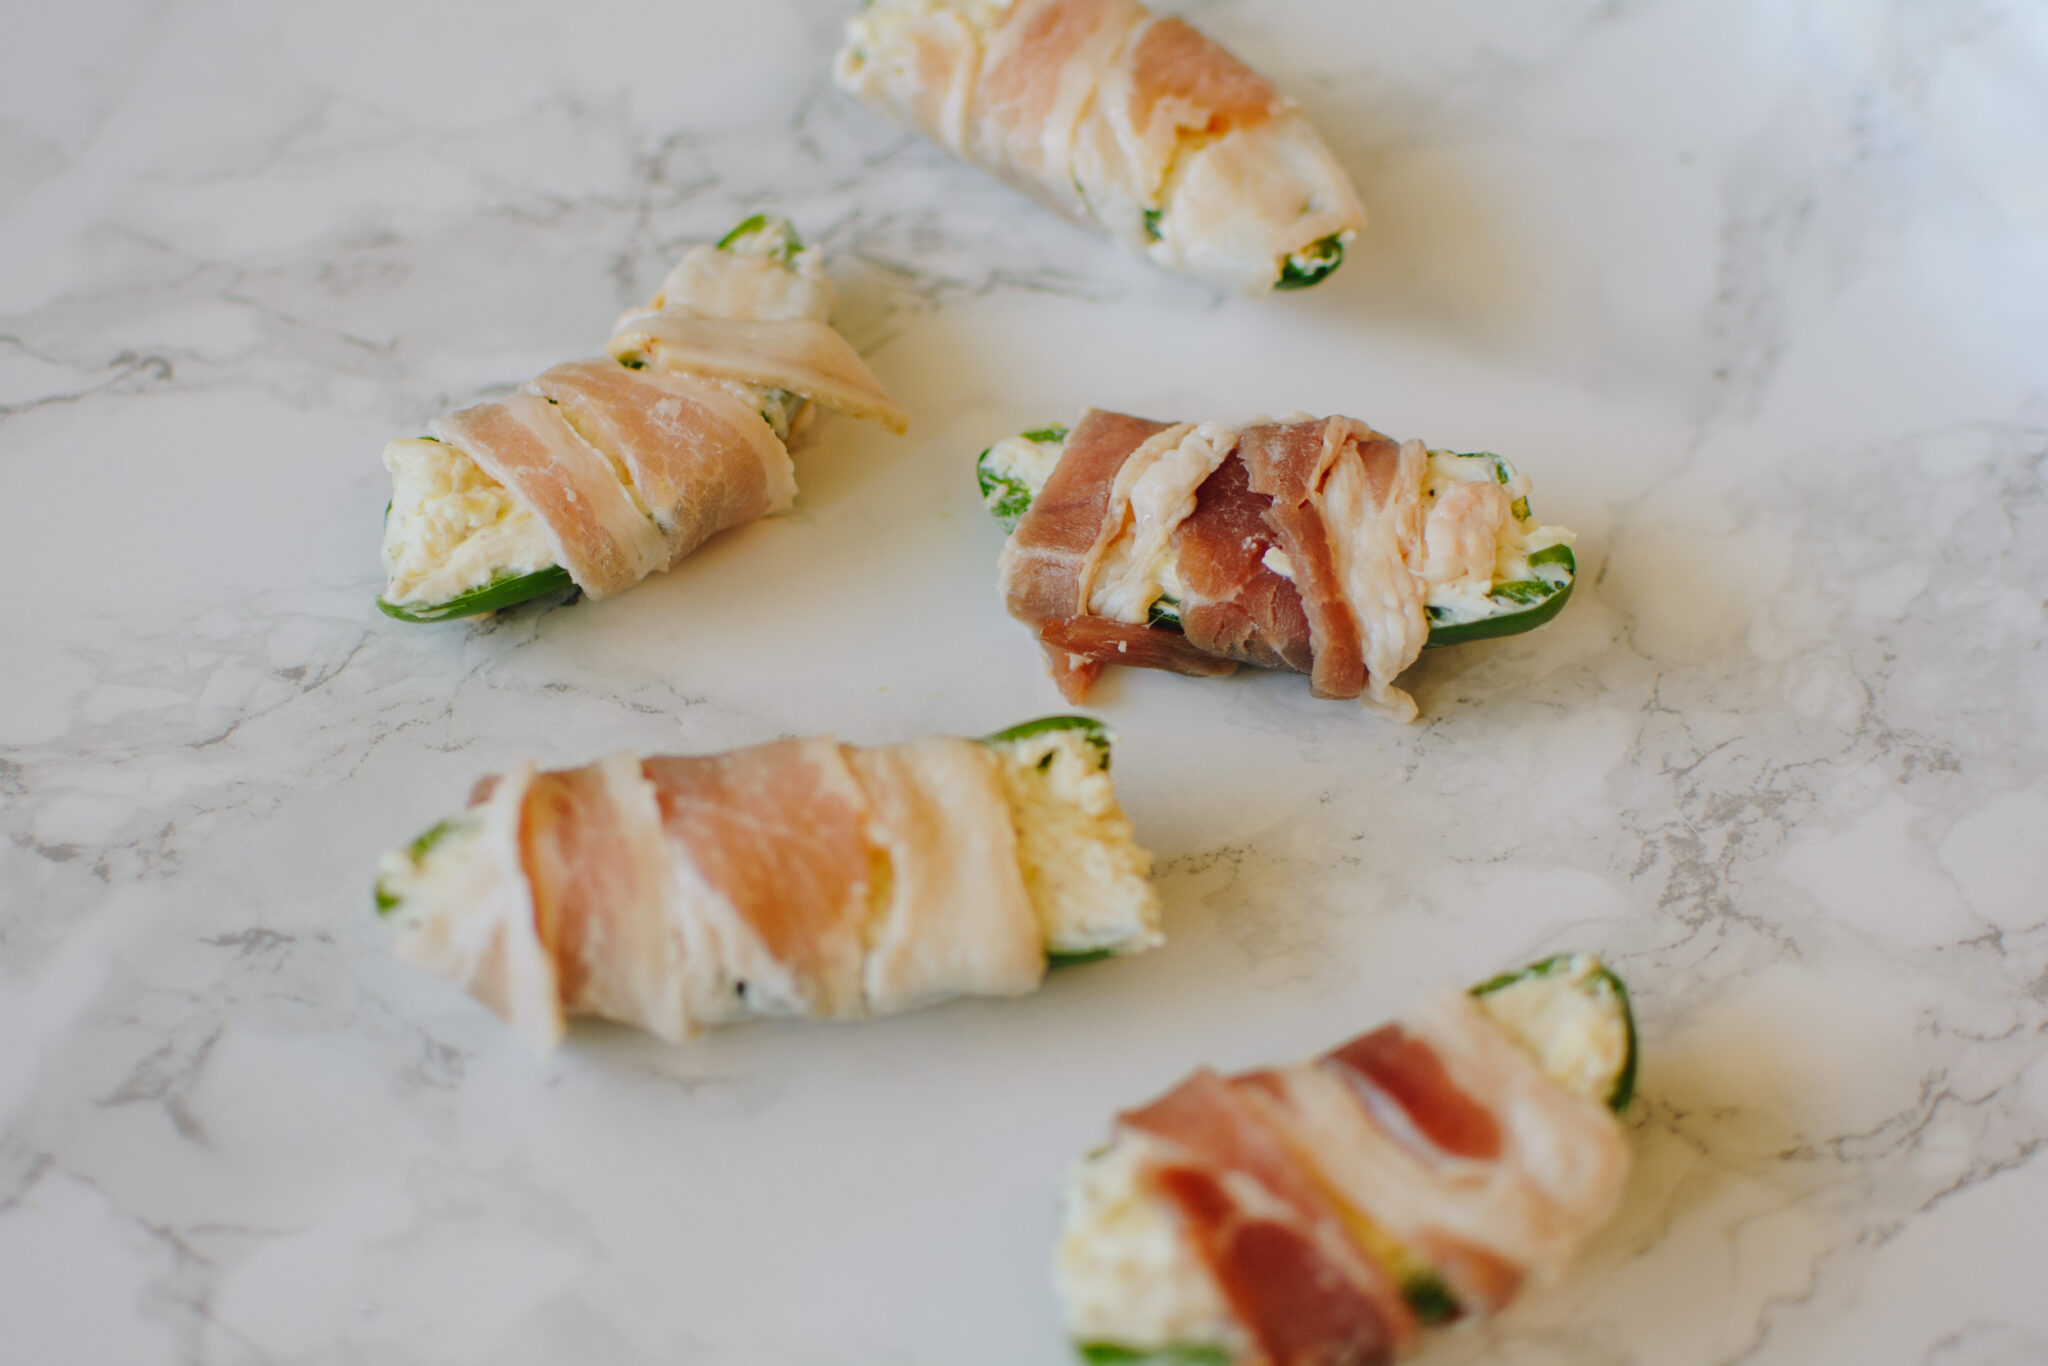 Arizona blogger Demi Bang shares how she wraps jalapeño poppers in bacon before cooking.